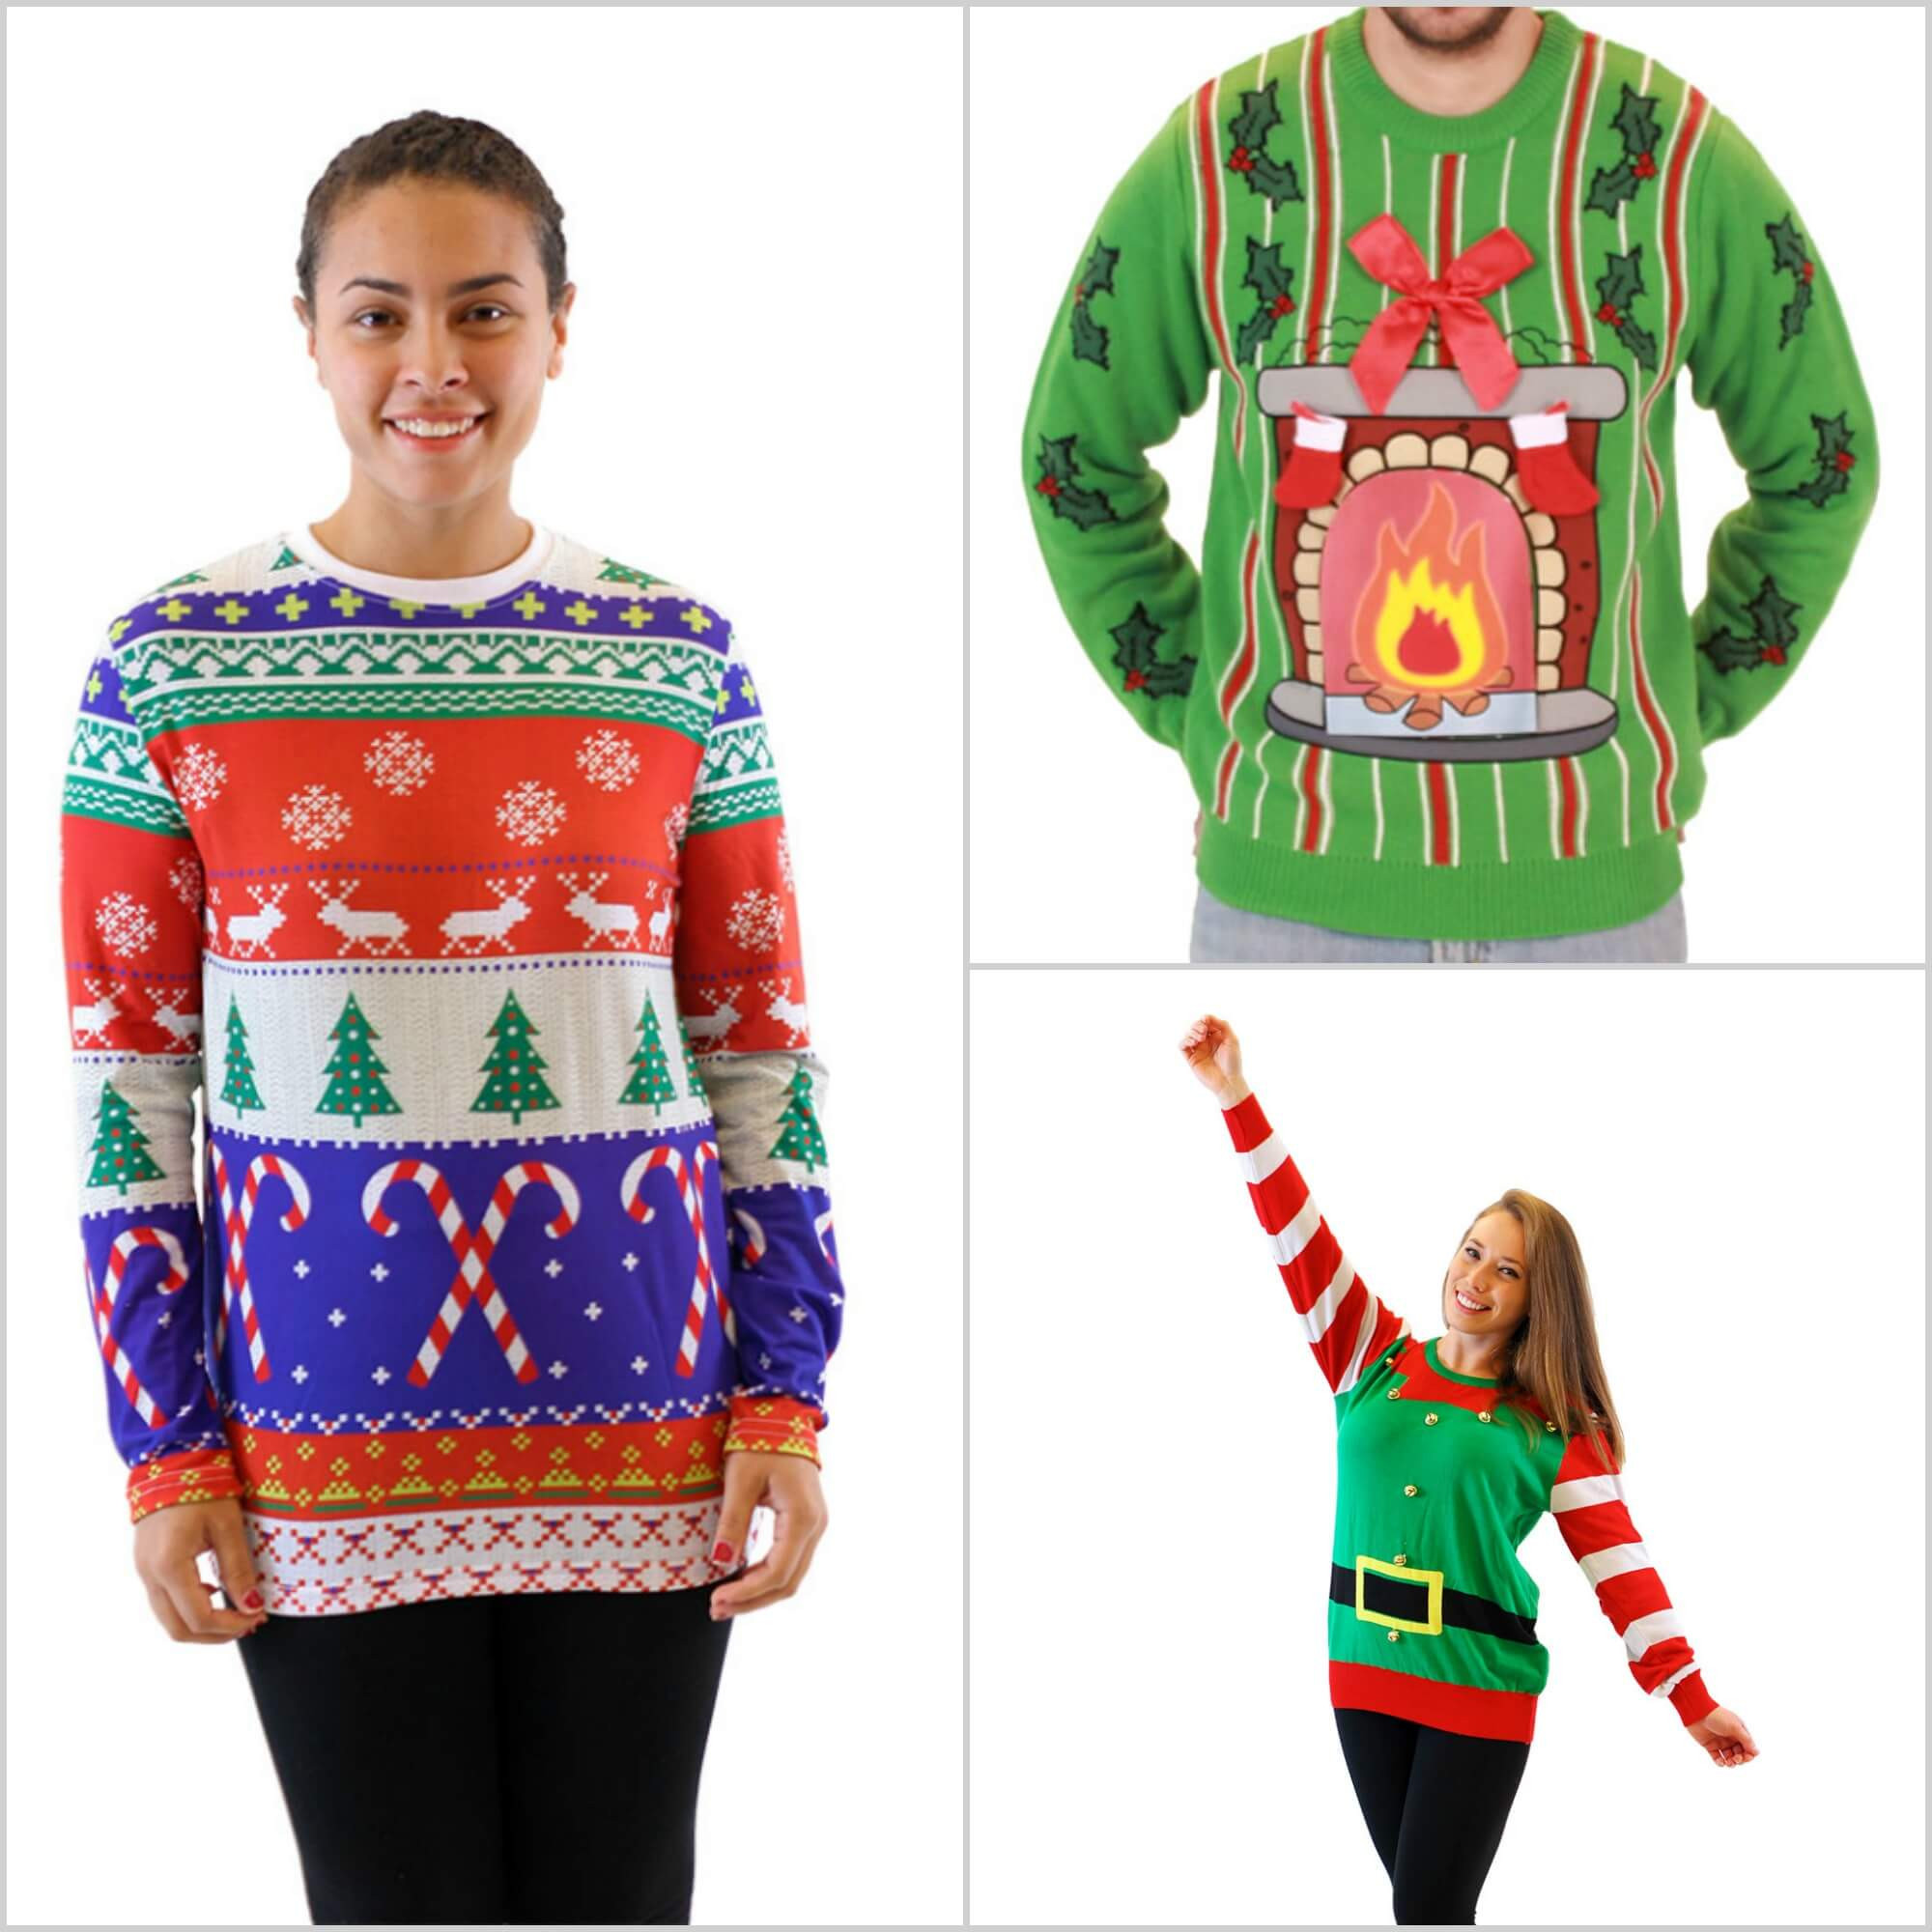 Holiday Ugly Sweater Party Ideas
 Ugly Christmas Sweater Party Ideas